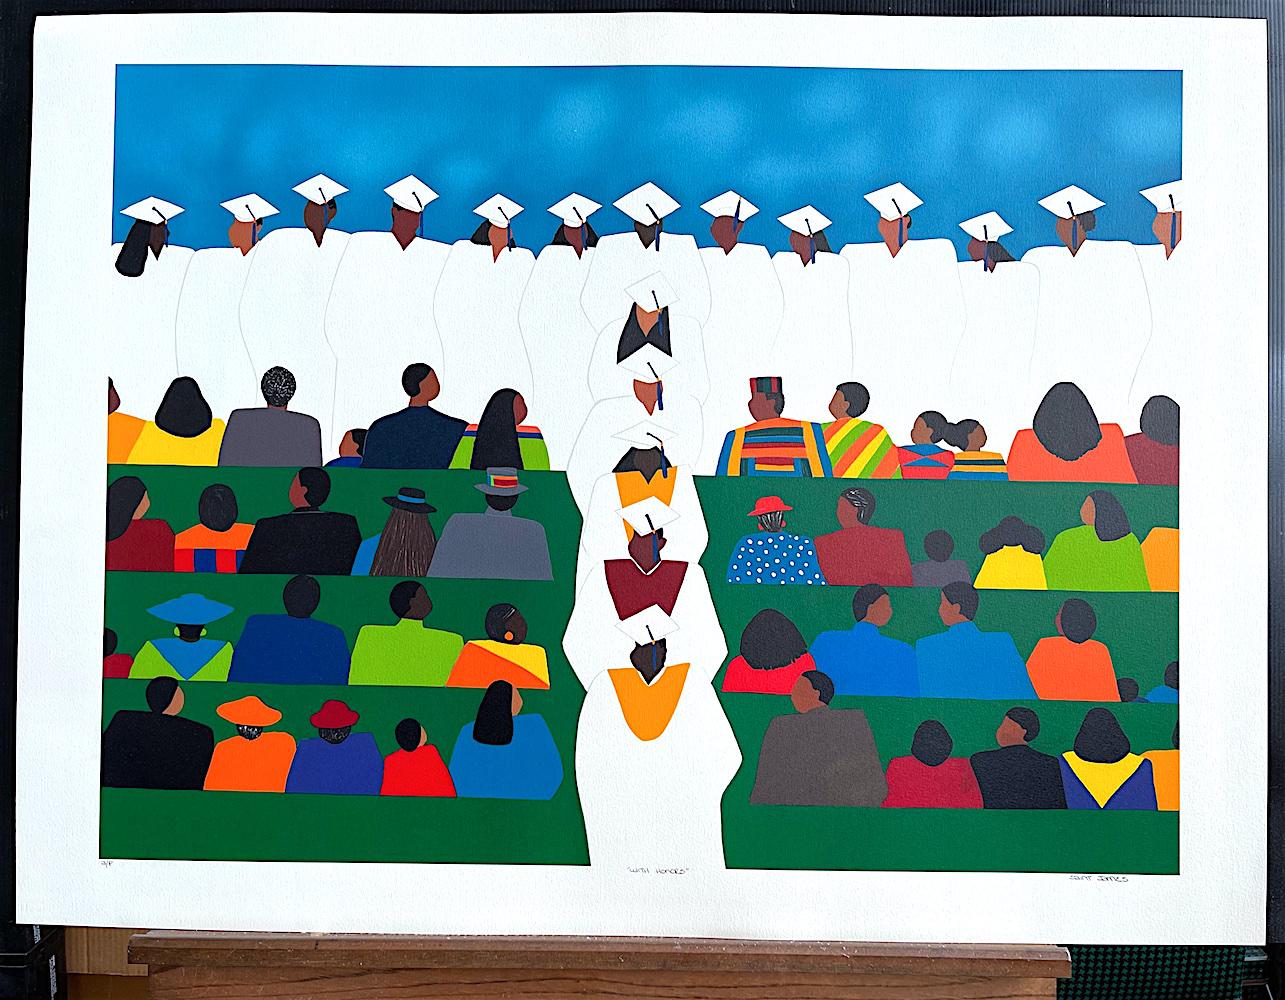 WITH HONORS Signed Lithograph, Graduation Ceremony, Multicultural Education - Contemporary Print by Synthia Saint James